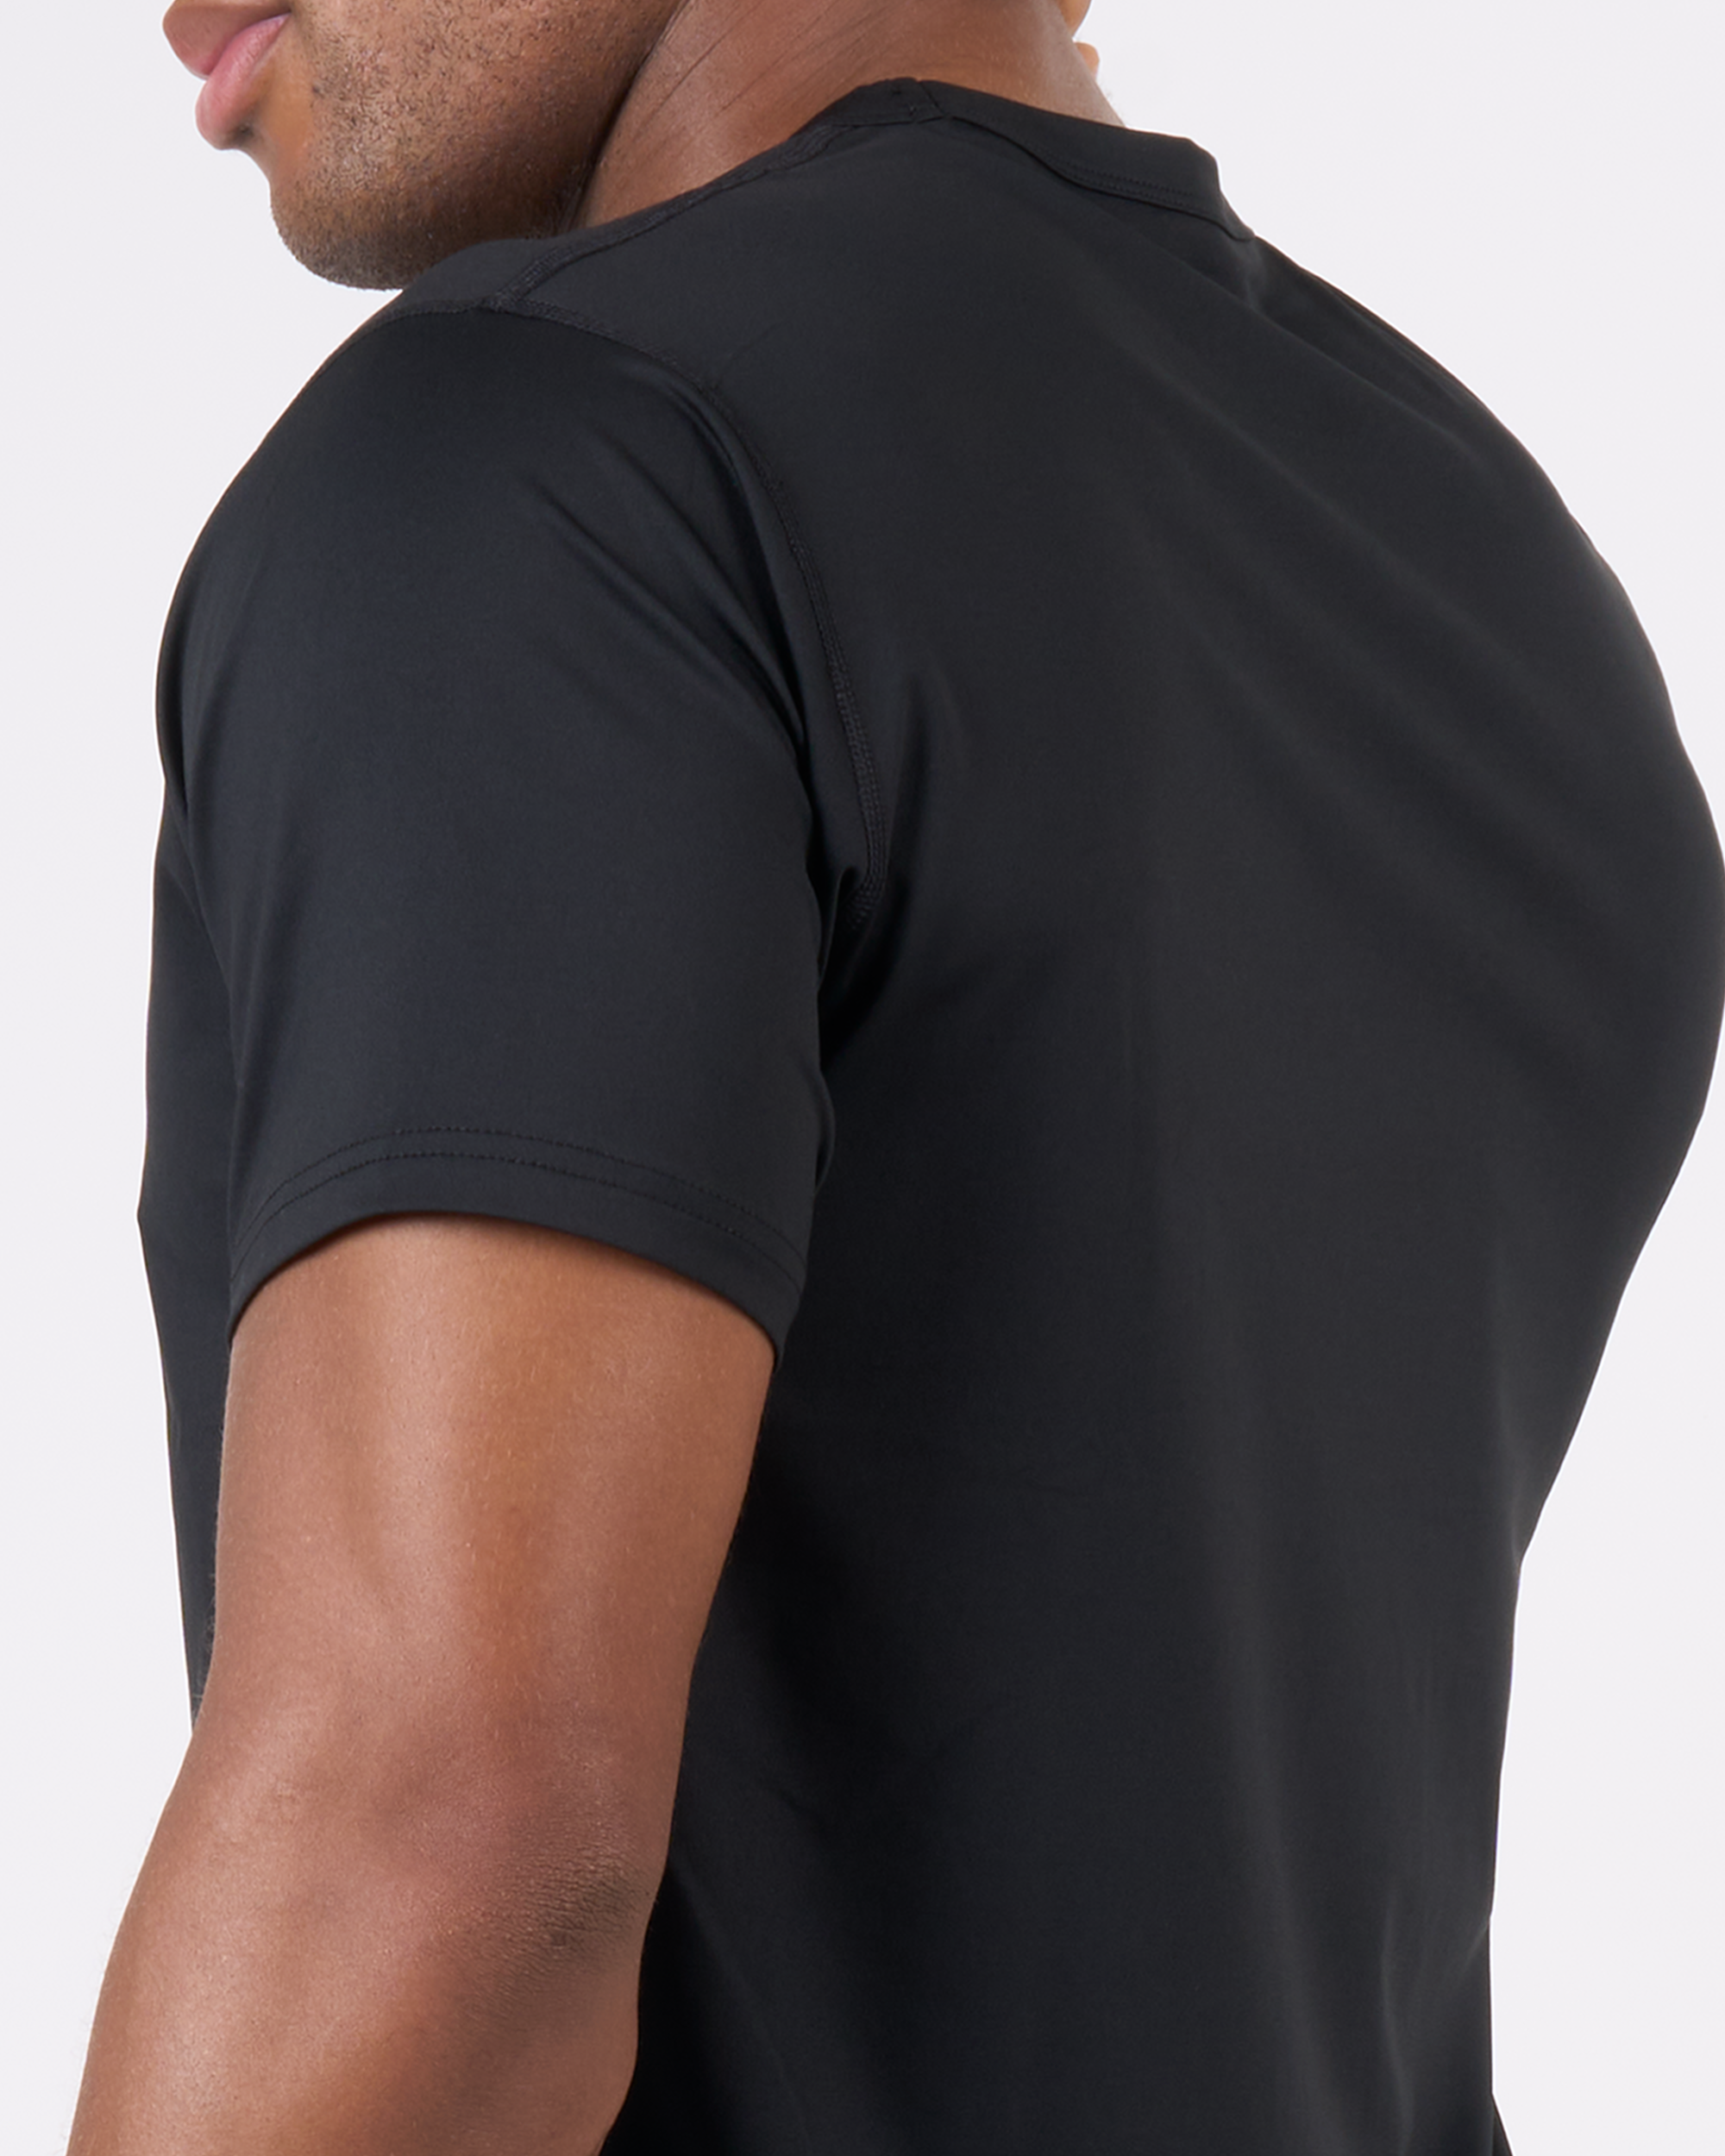 Foreign Rider Co Black Technical Fabric Short Sleeve T-Shirt Shoulder Detail